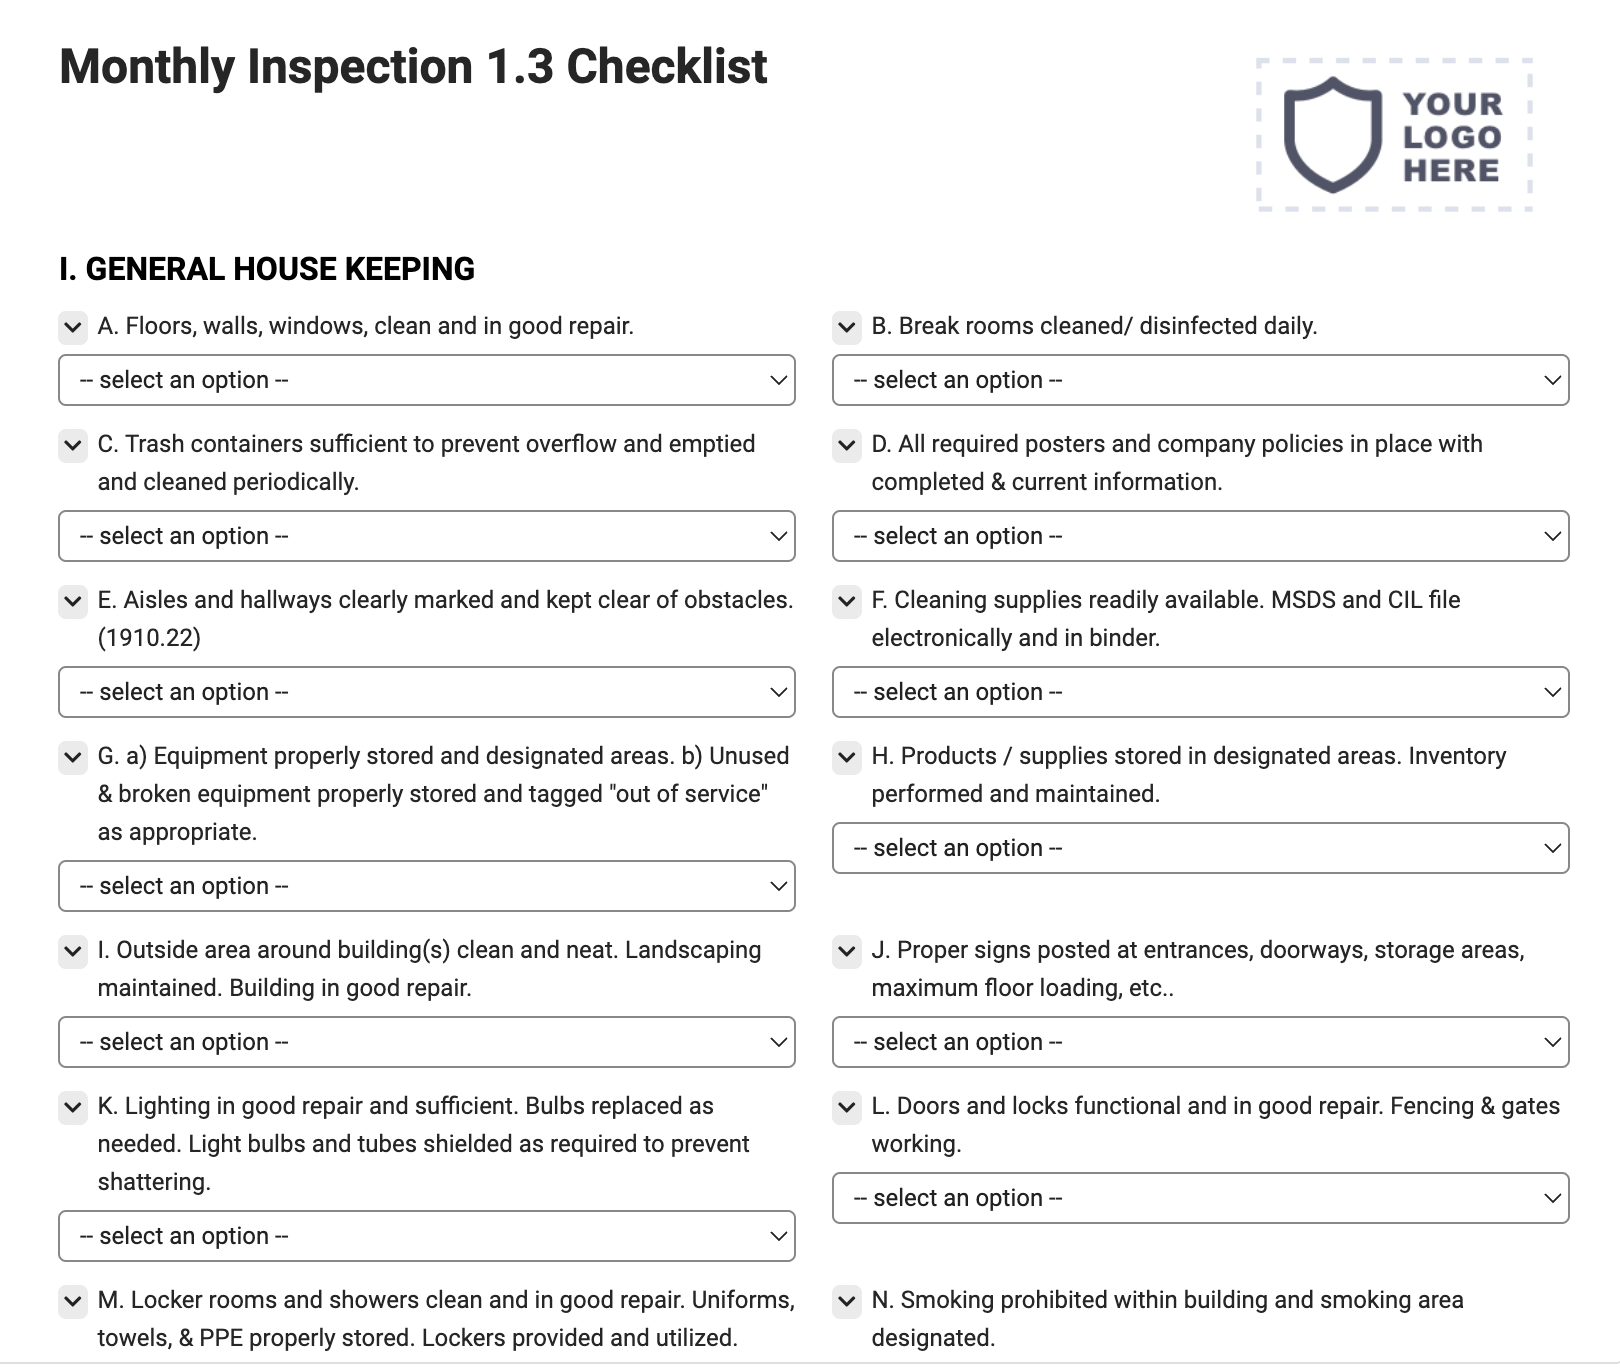 Monthly Inspection 1.3 Checklist